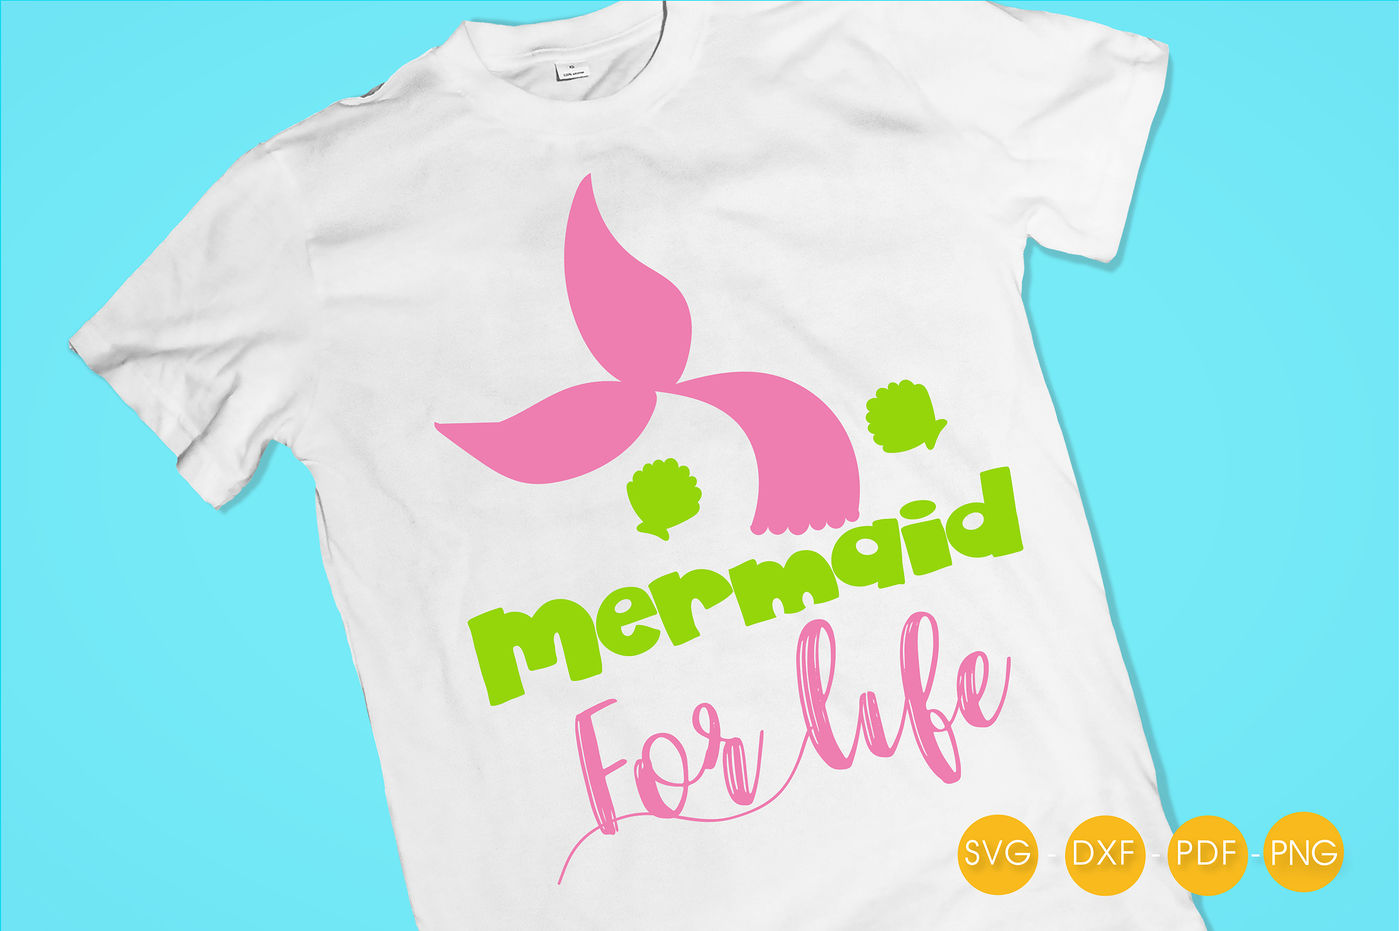 ori 3464960 d0569b6feba3105bcd674d14b7911a6e10517d4d mermaid for life svg png eps dxf cut file